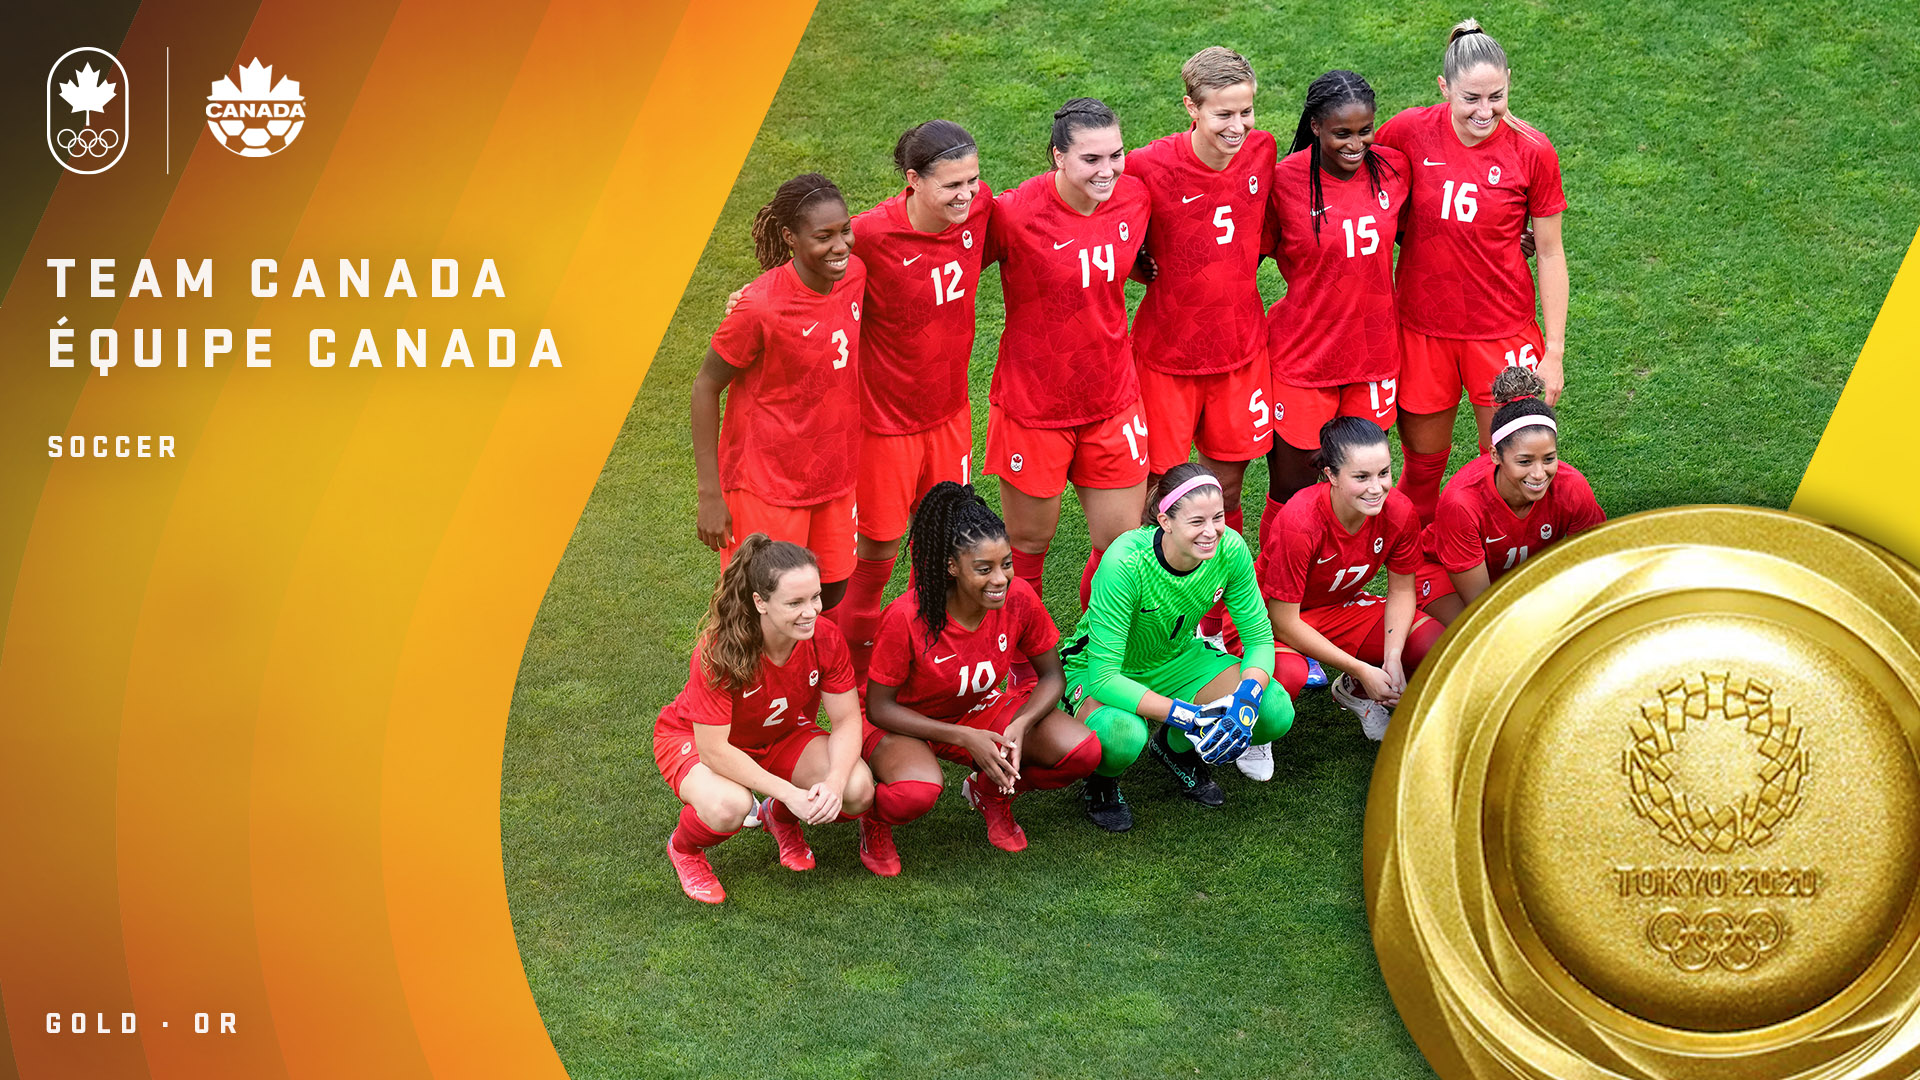 Team Canada claims first ever gold medal in women's soccer Team